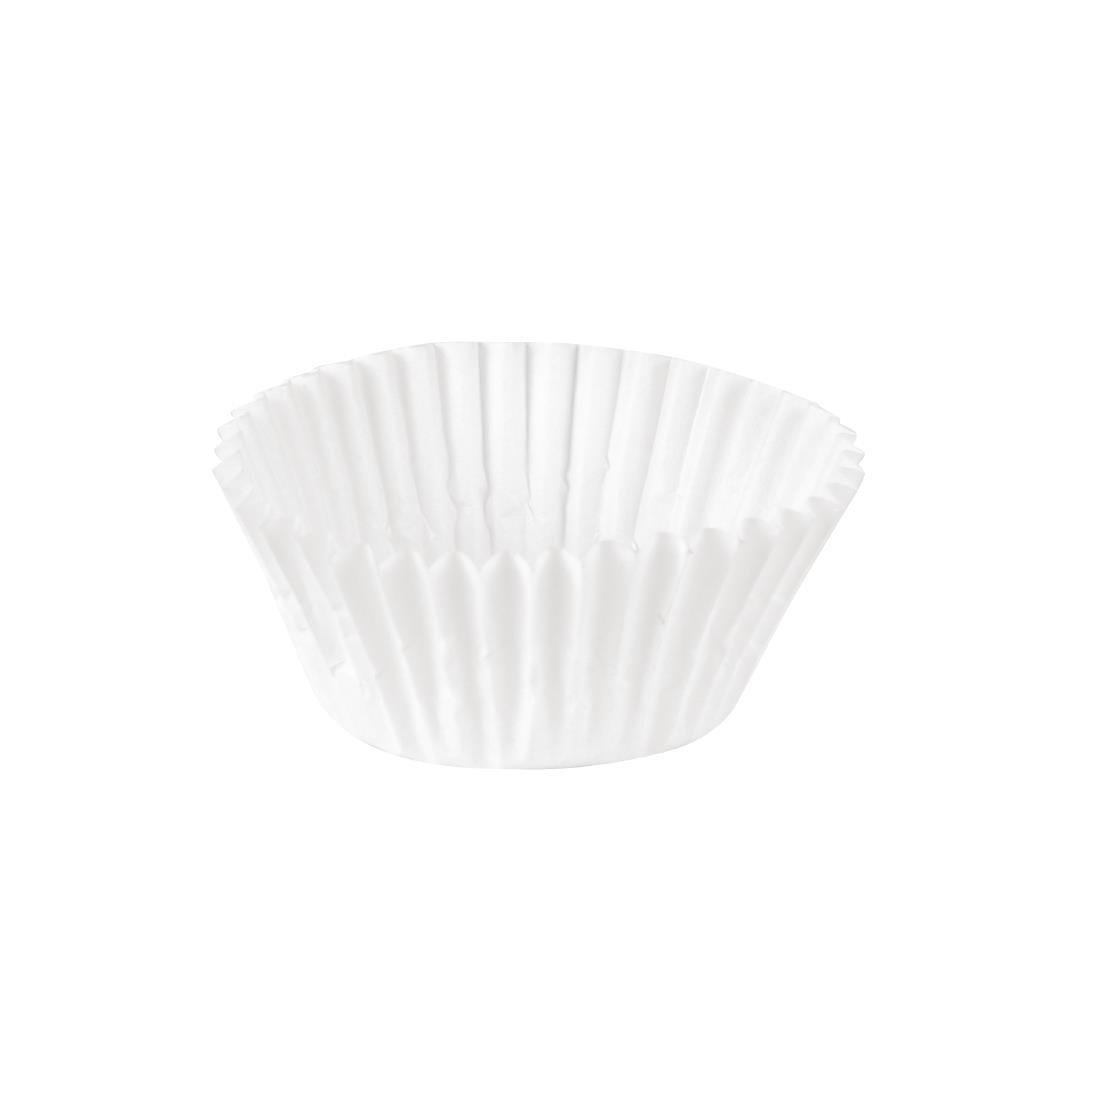 Fiesta Recyclable Cupcake Paper Cases (Pack of 1000) - CE995  - 1